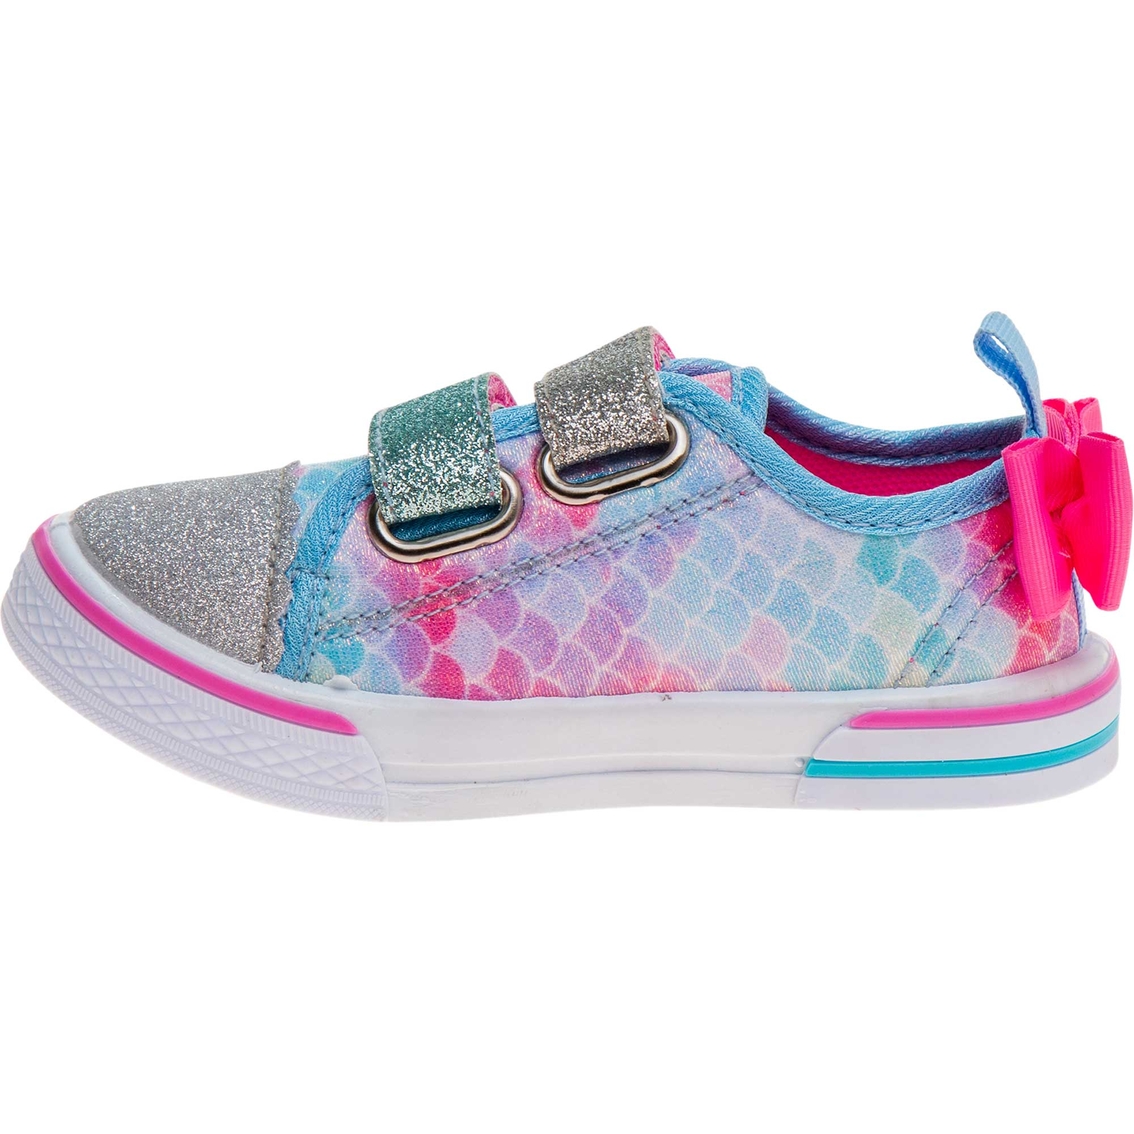 Laura Ashley Toddler Girls 2V Bow Sneakers - Image 3 of 5